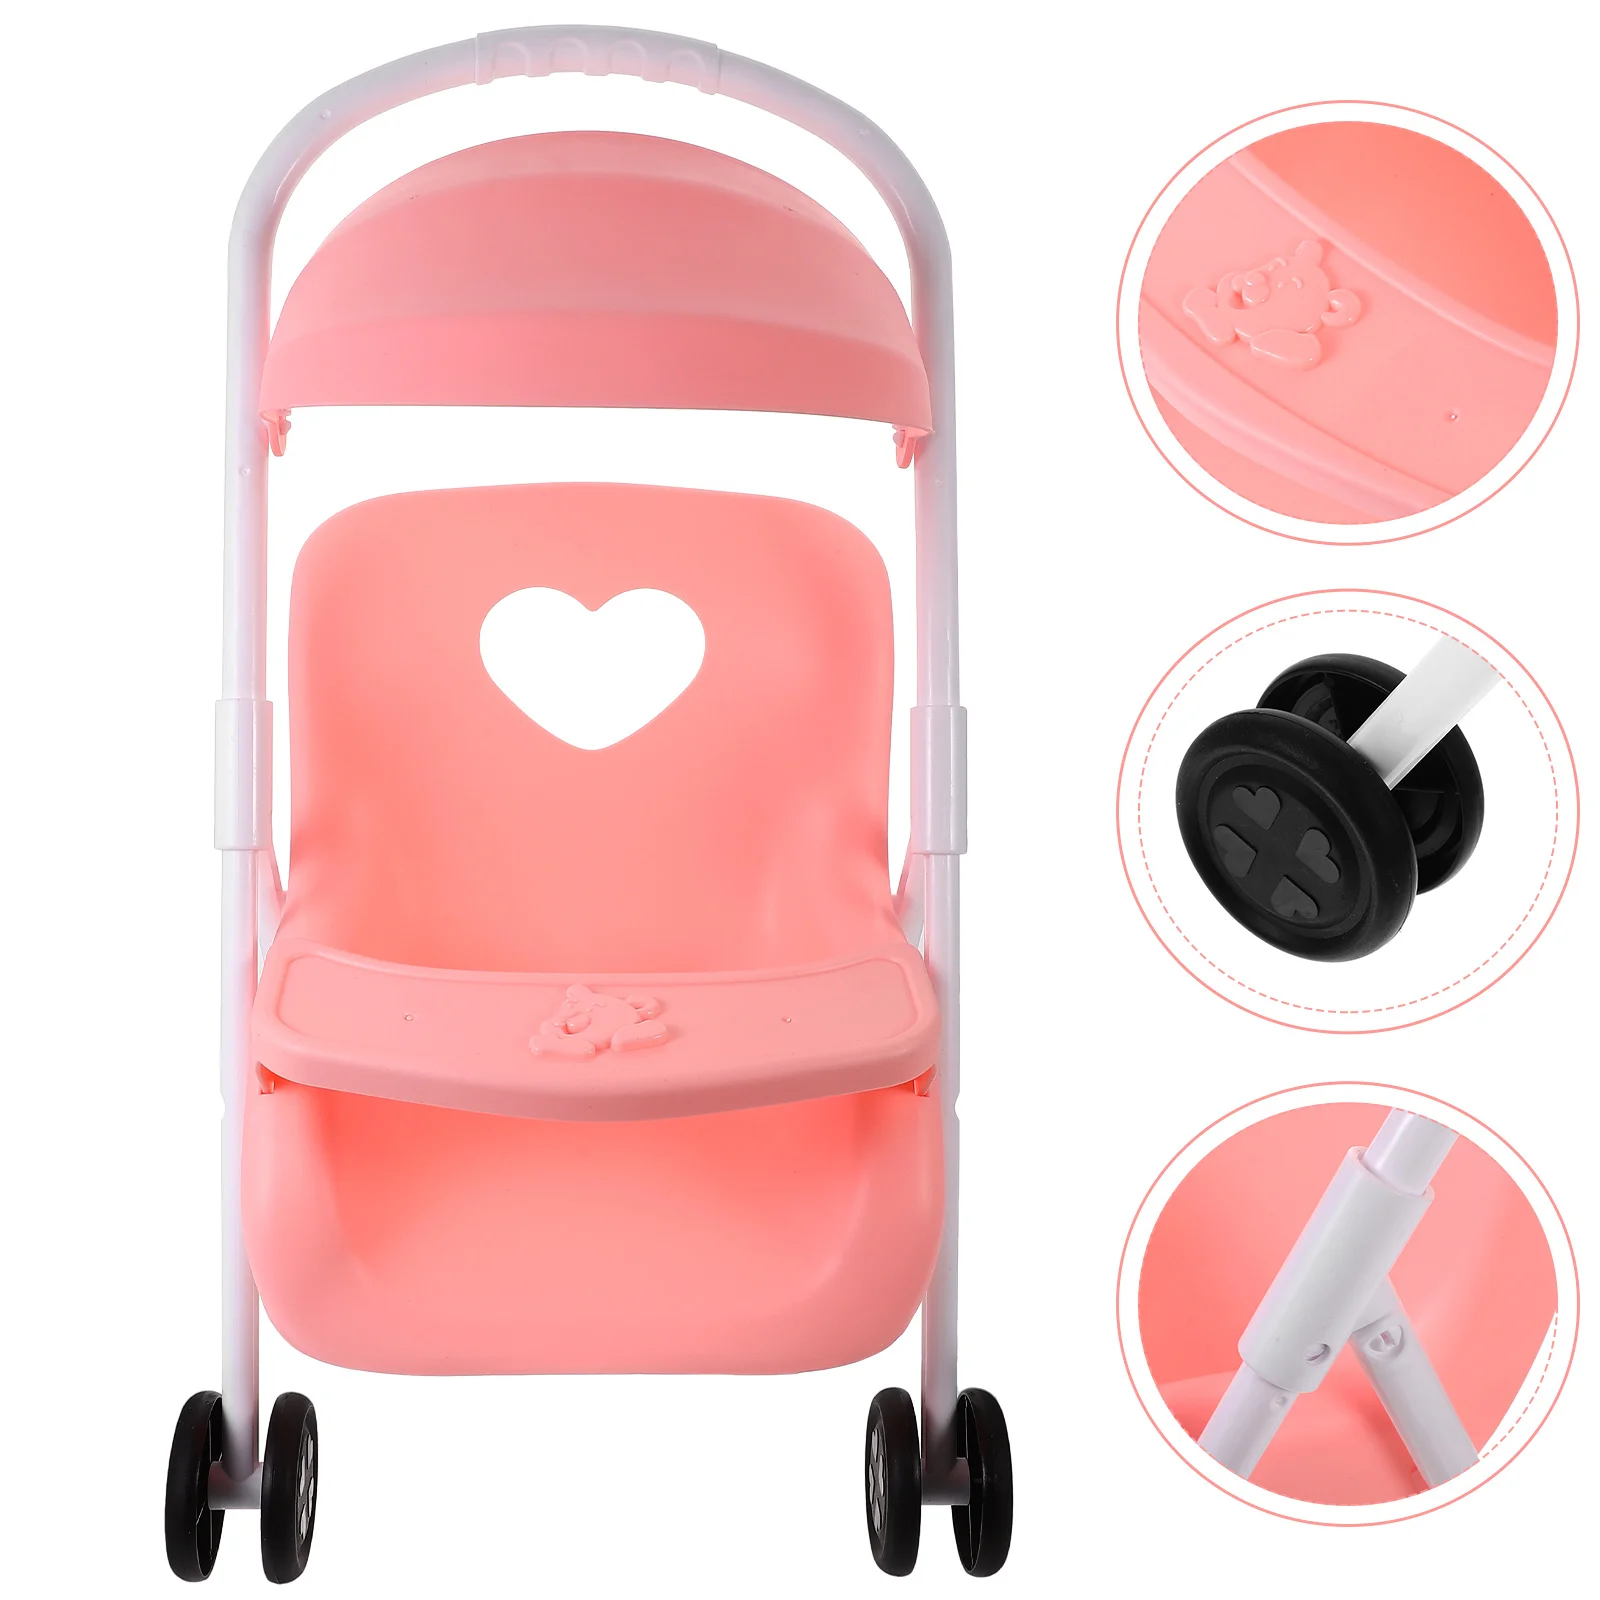 Doll Stroller Play Game Doll Stroller Simulated Play Game Stroller Furniture Adornment Children Role Playing Game for Dollhouse tll children s bicycle boys pedal bicycle girls middle and big children primary school children s stroller